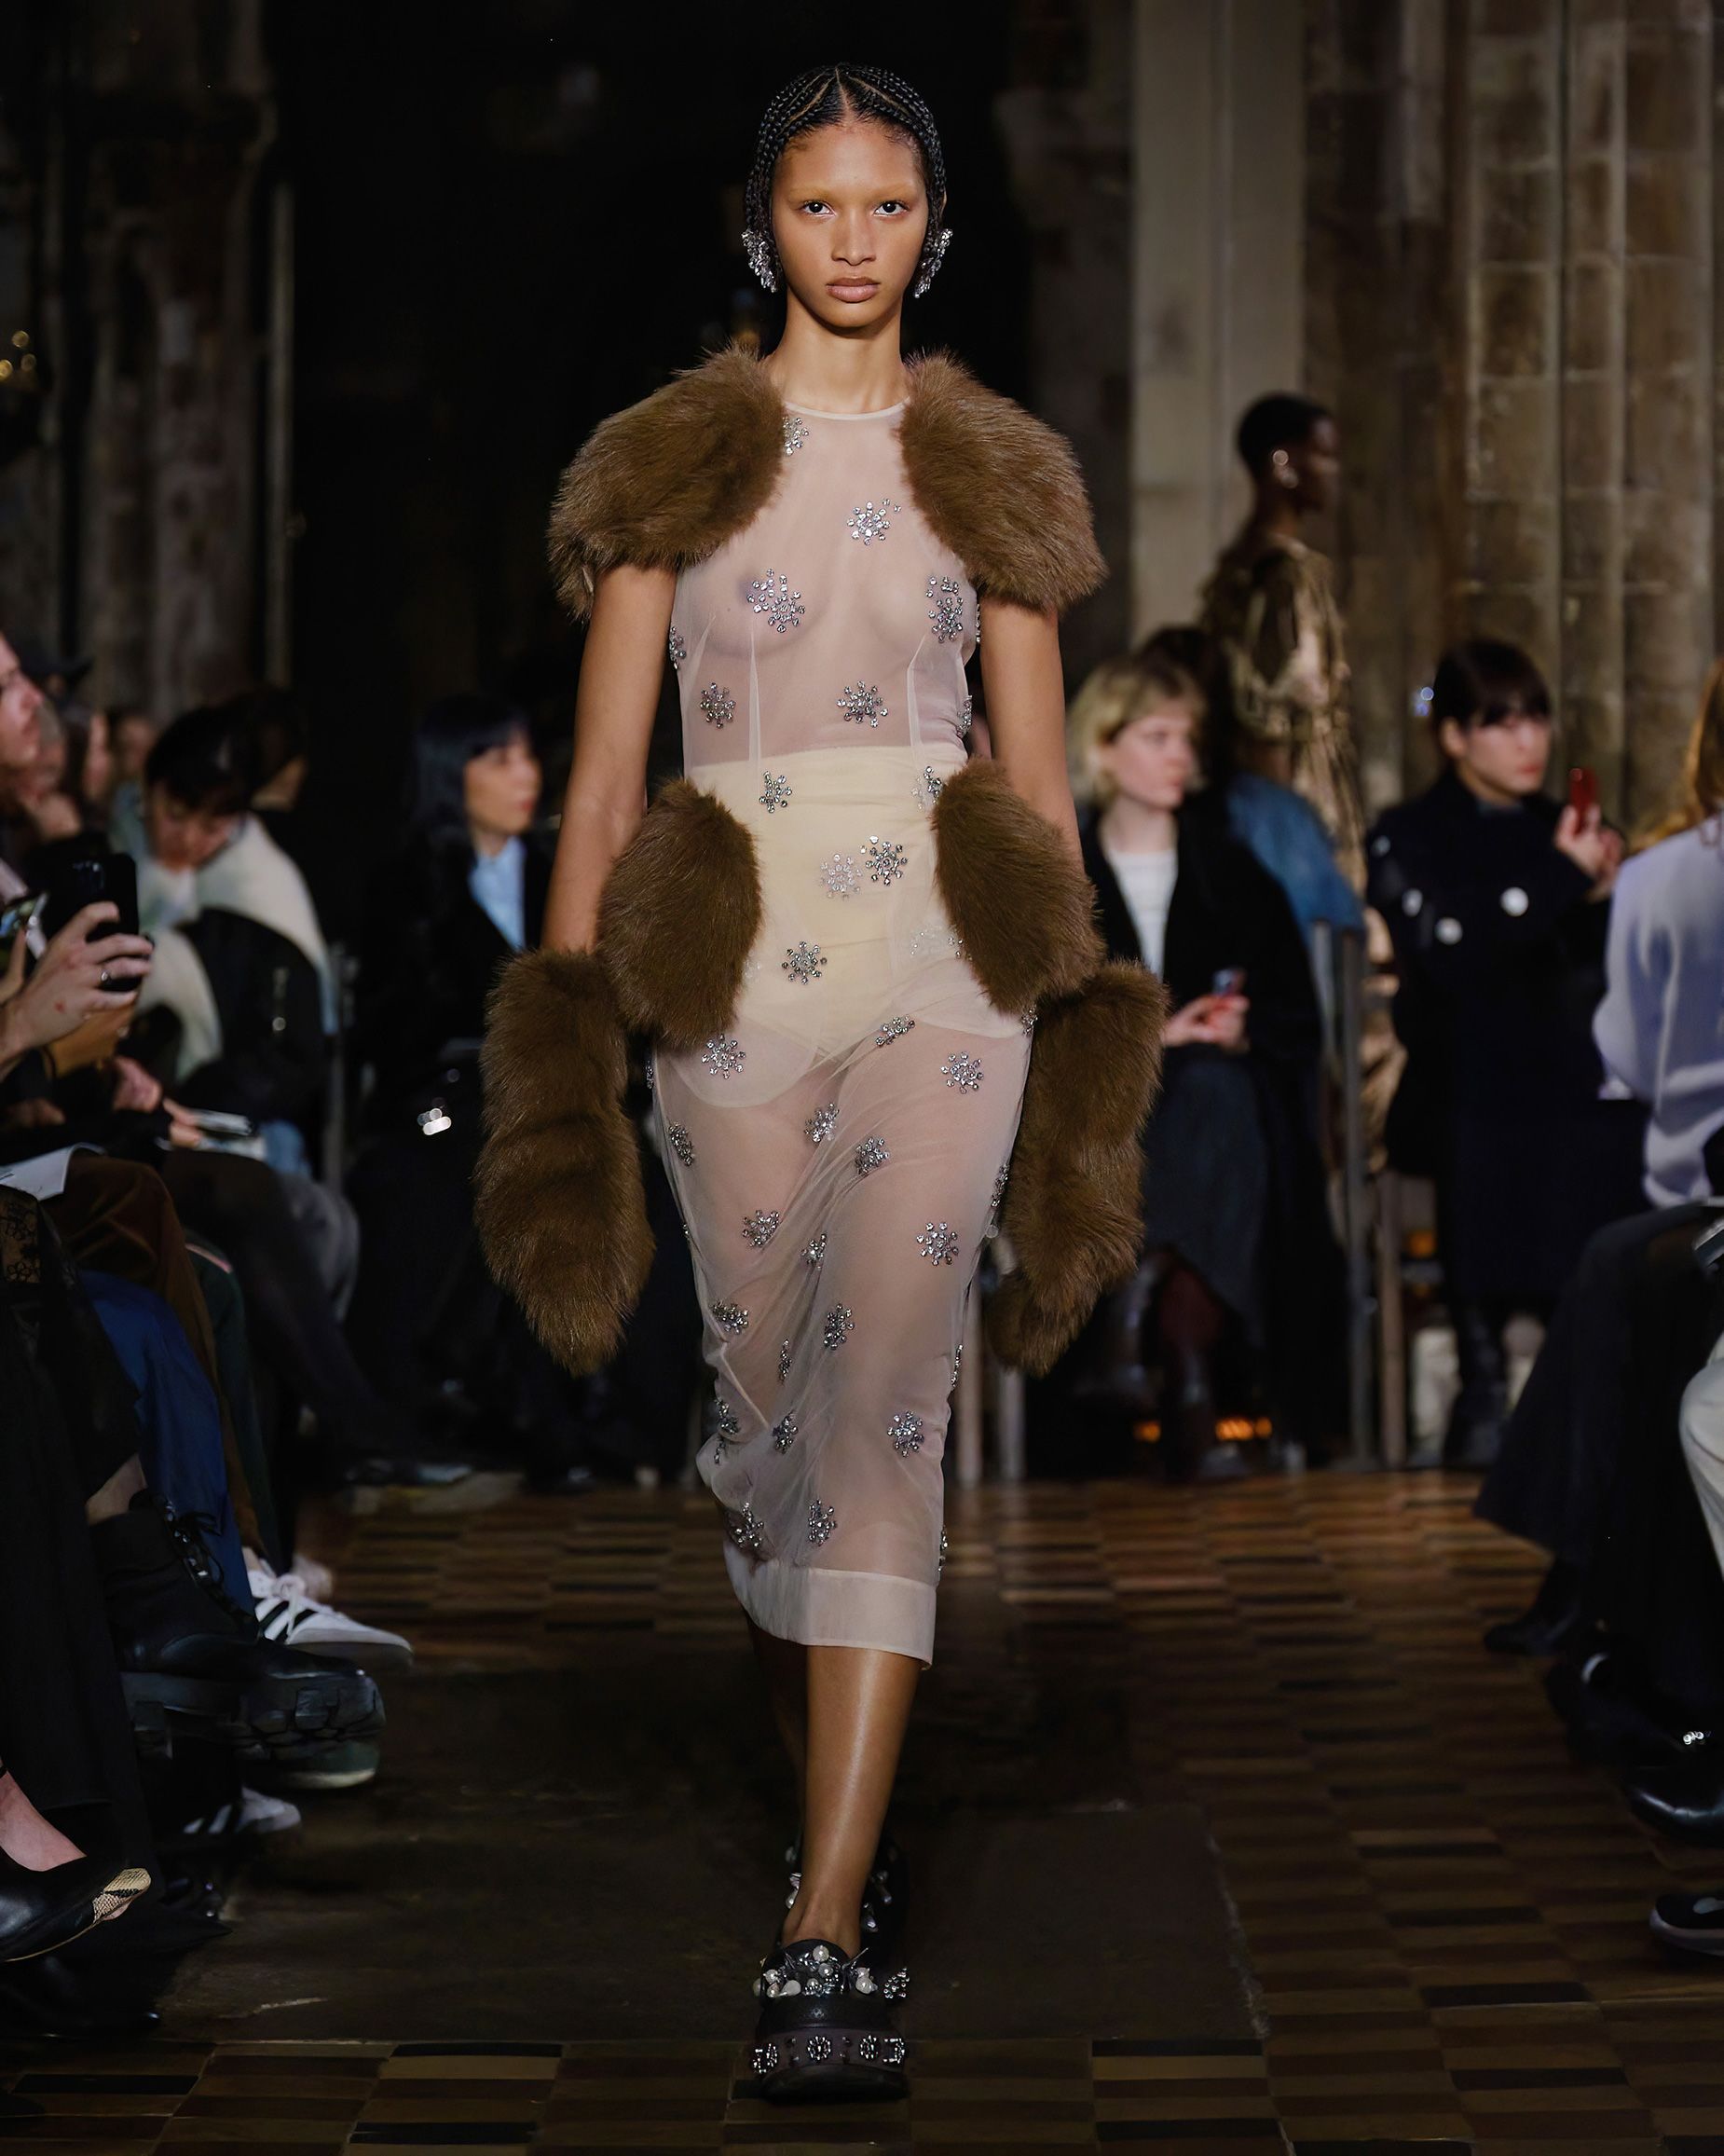 Faux fur was a major theme at the Simone Rocha show, where patches were used to alter the silhouette like hip or shoulder pads.